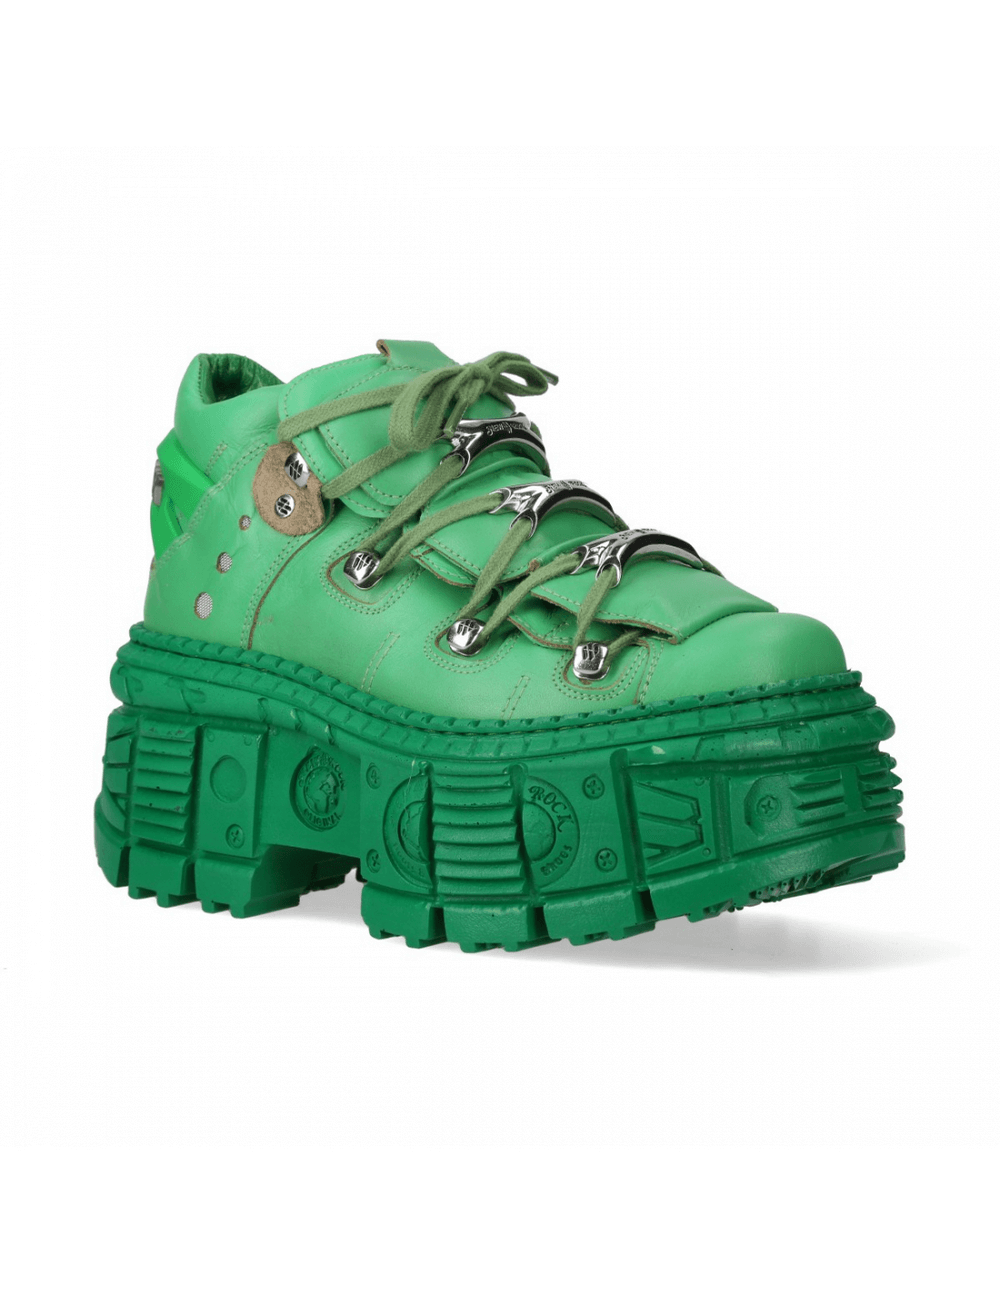 NEW ROCK Green Ankle Boots with Rock and Fashion Edge